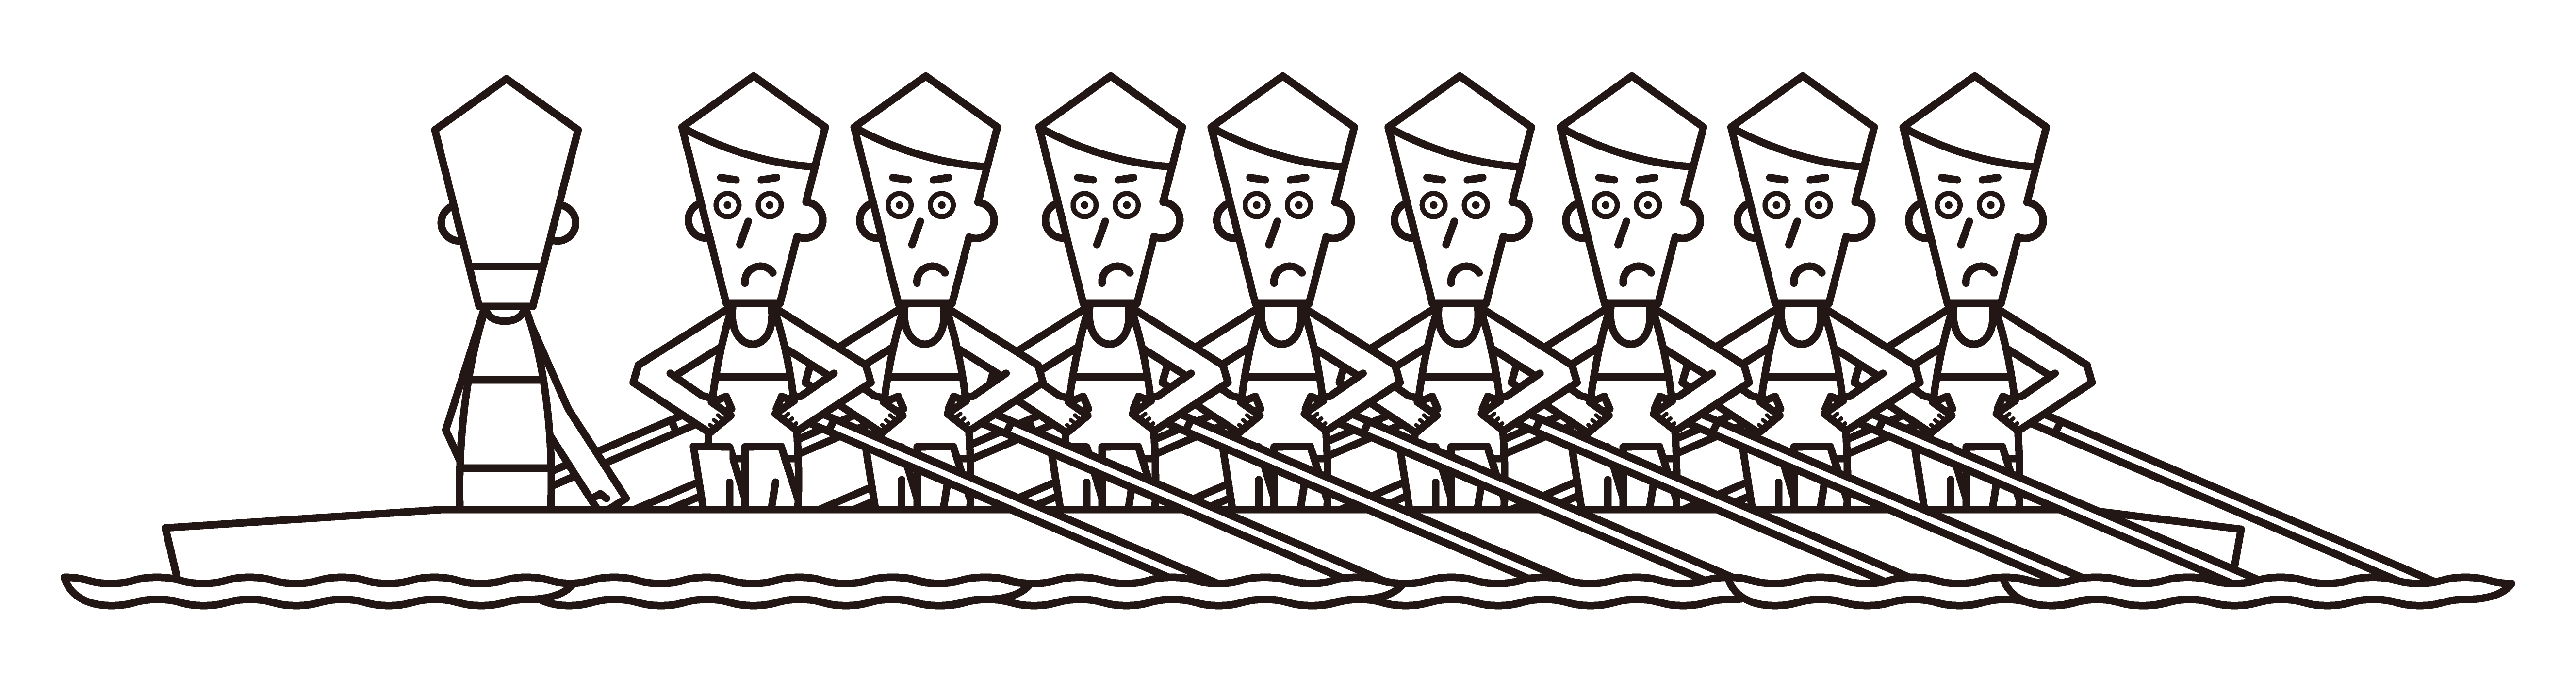 Illustration of the athletes (male) in the rowing competition (eight)